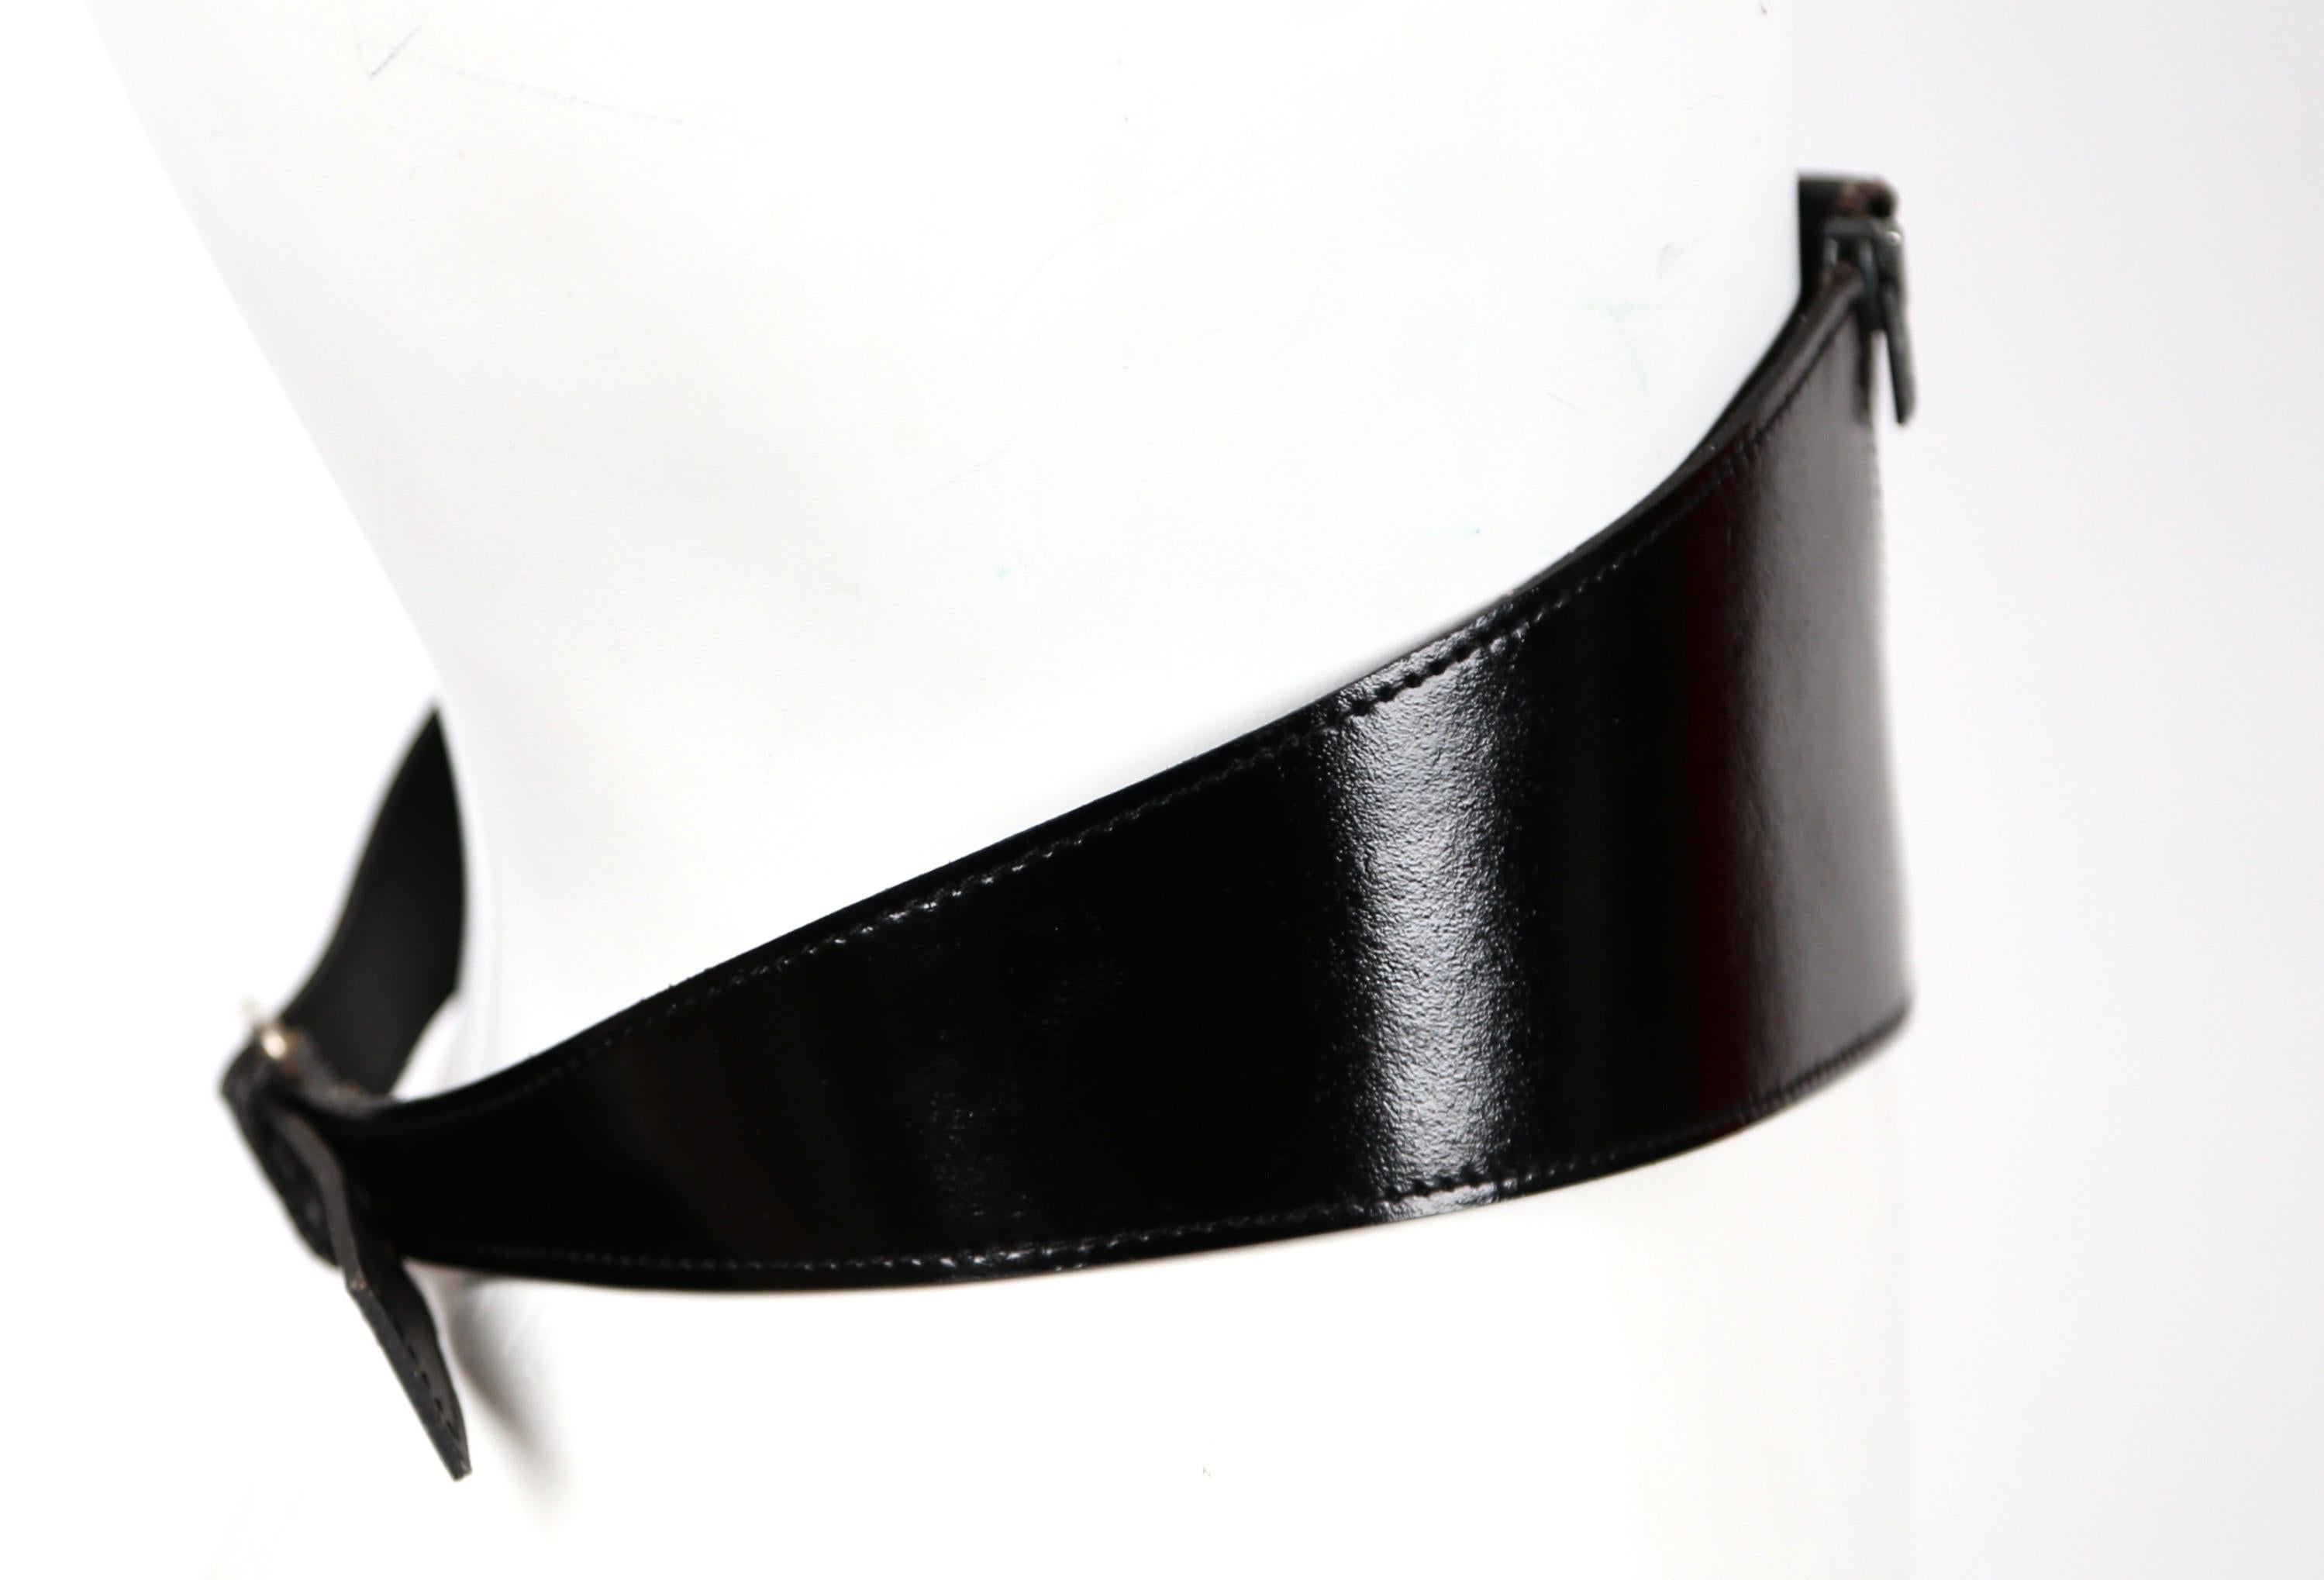 Jet-black, patent leather belt with zipper detail designed by Azzedine Alaia for Vacher dating to the 1980's. French size 70, which best fits a 25-28.5